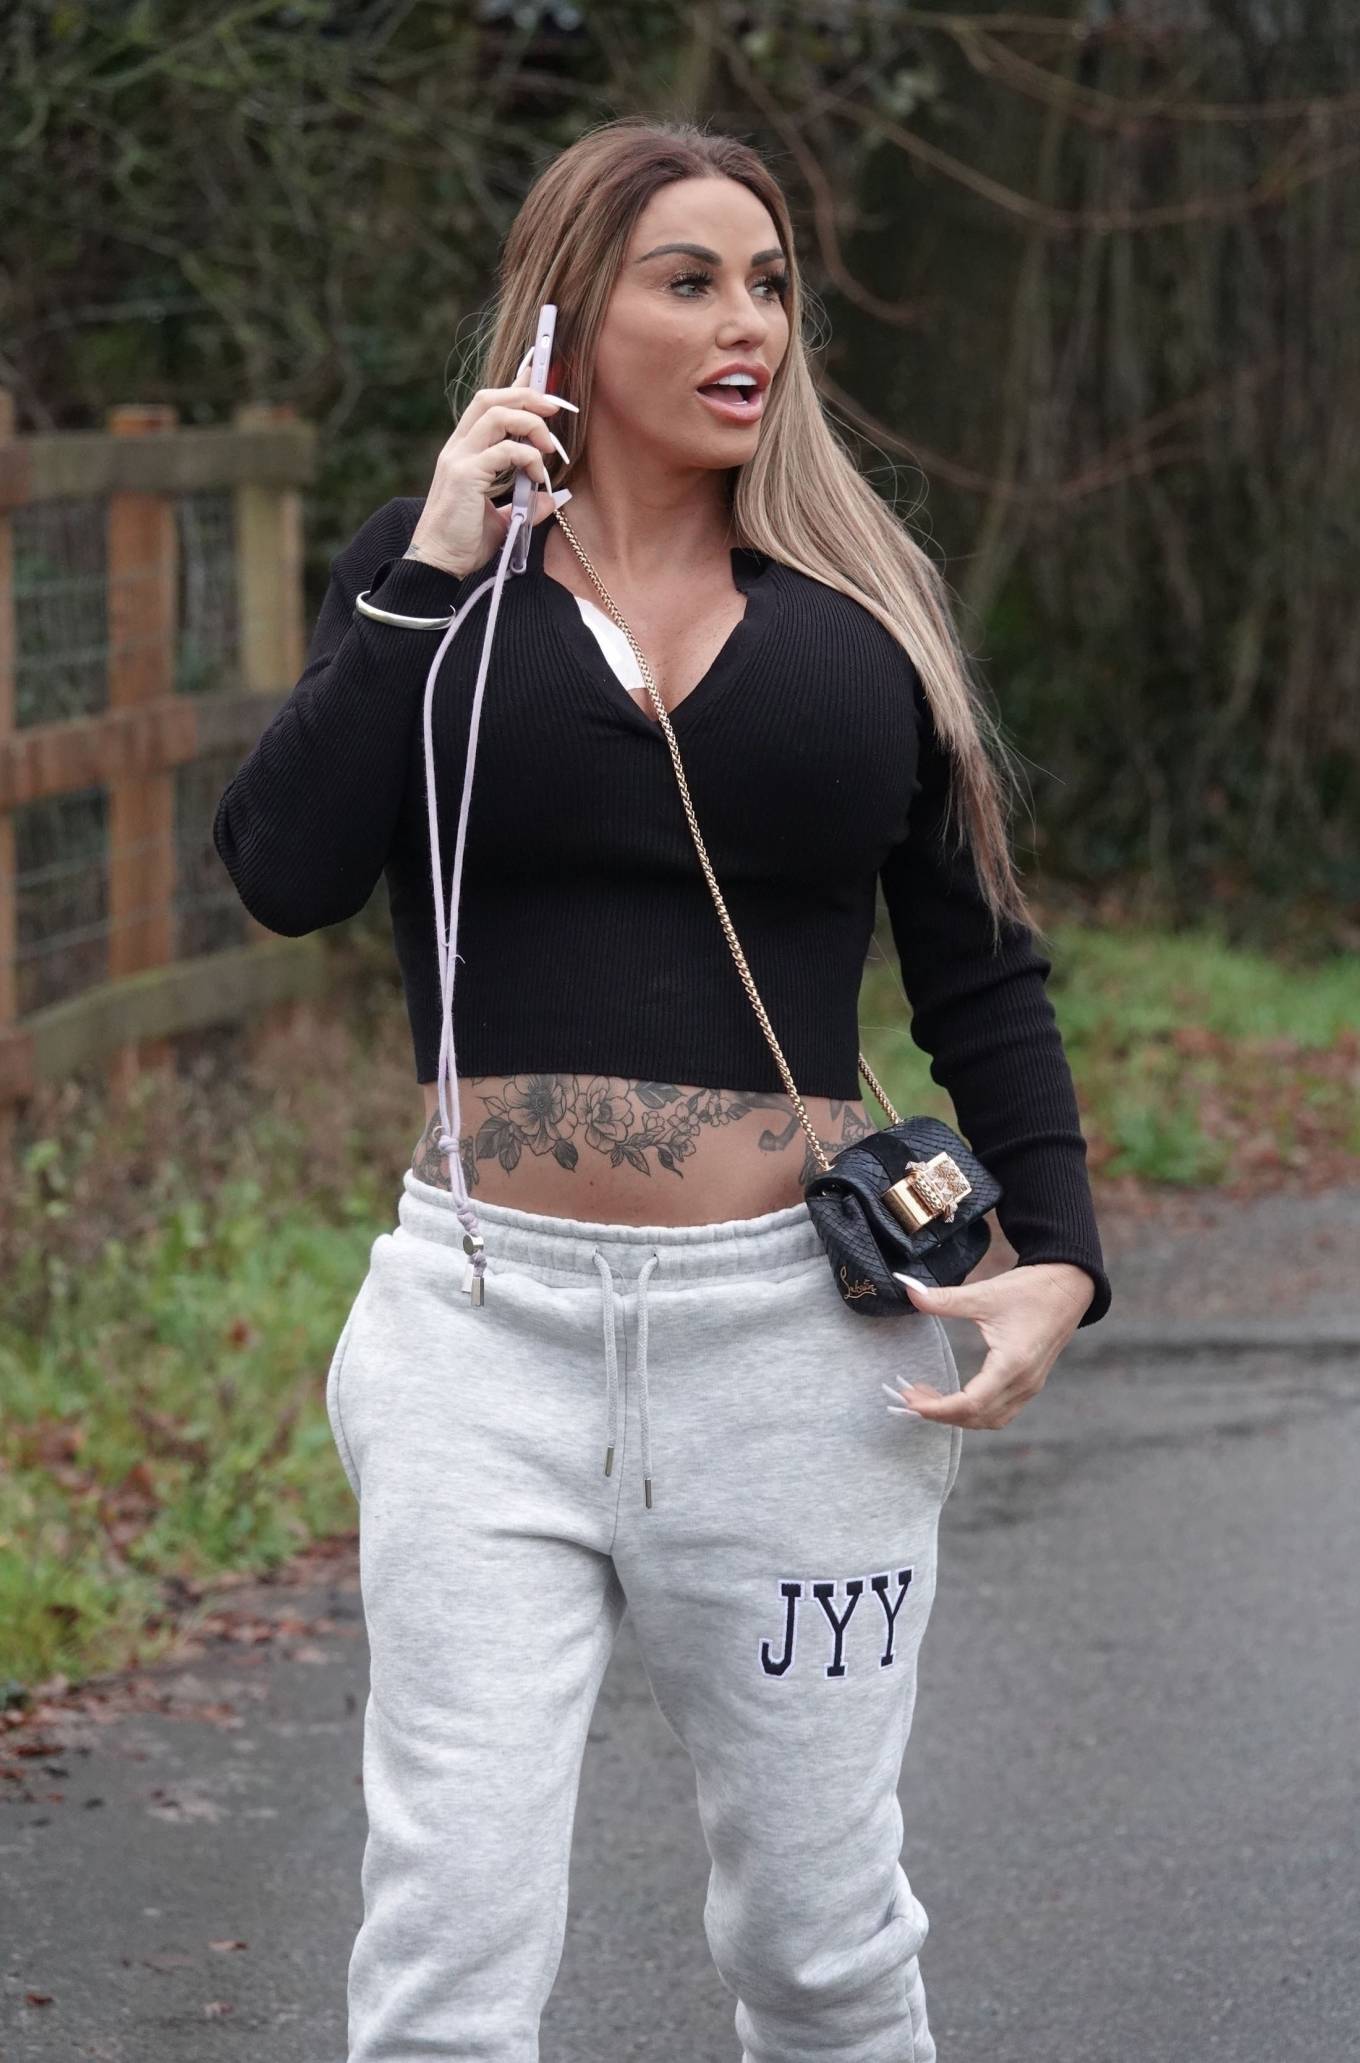 Katie Price 2022 : Katie Price – Out in London-07